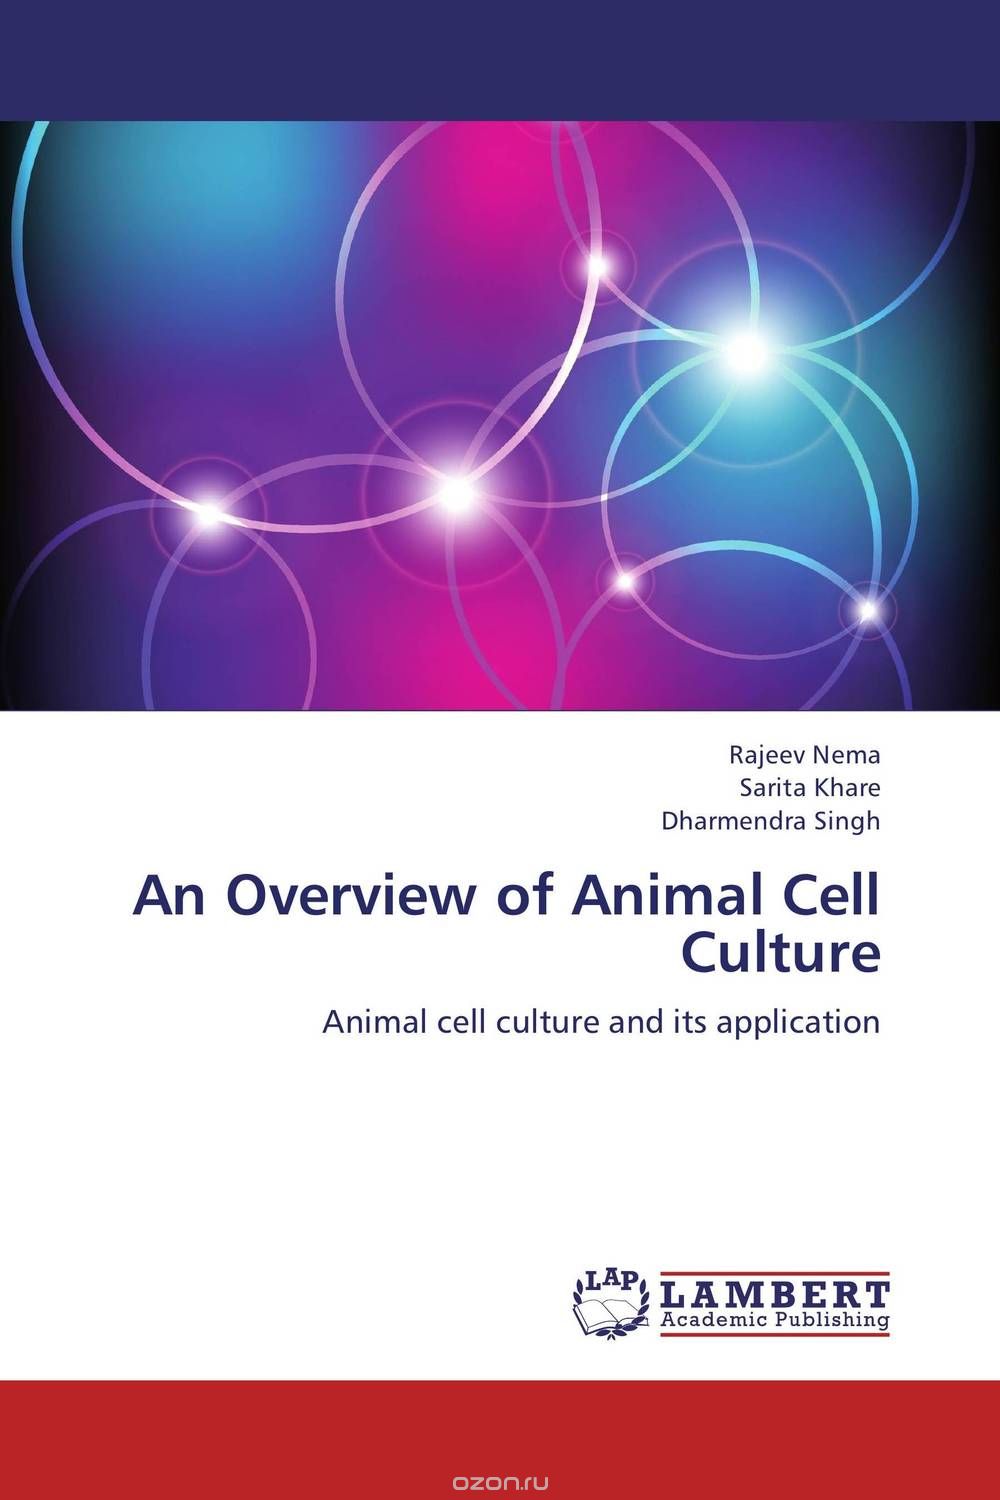 An Overview of Animal Cell Culture